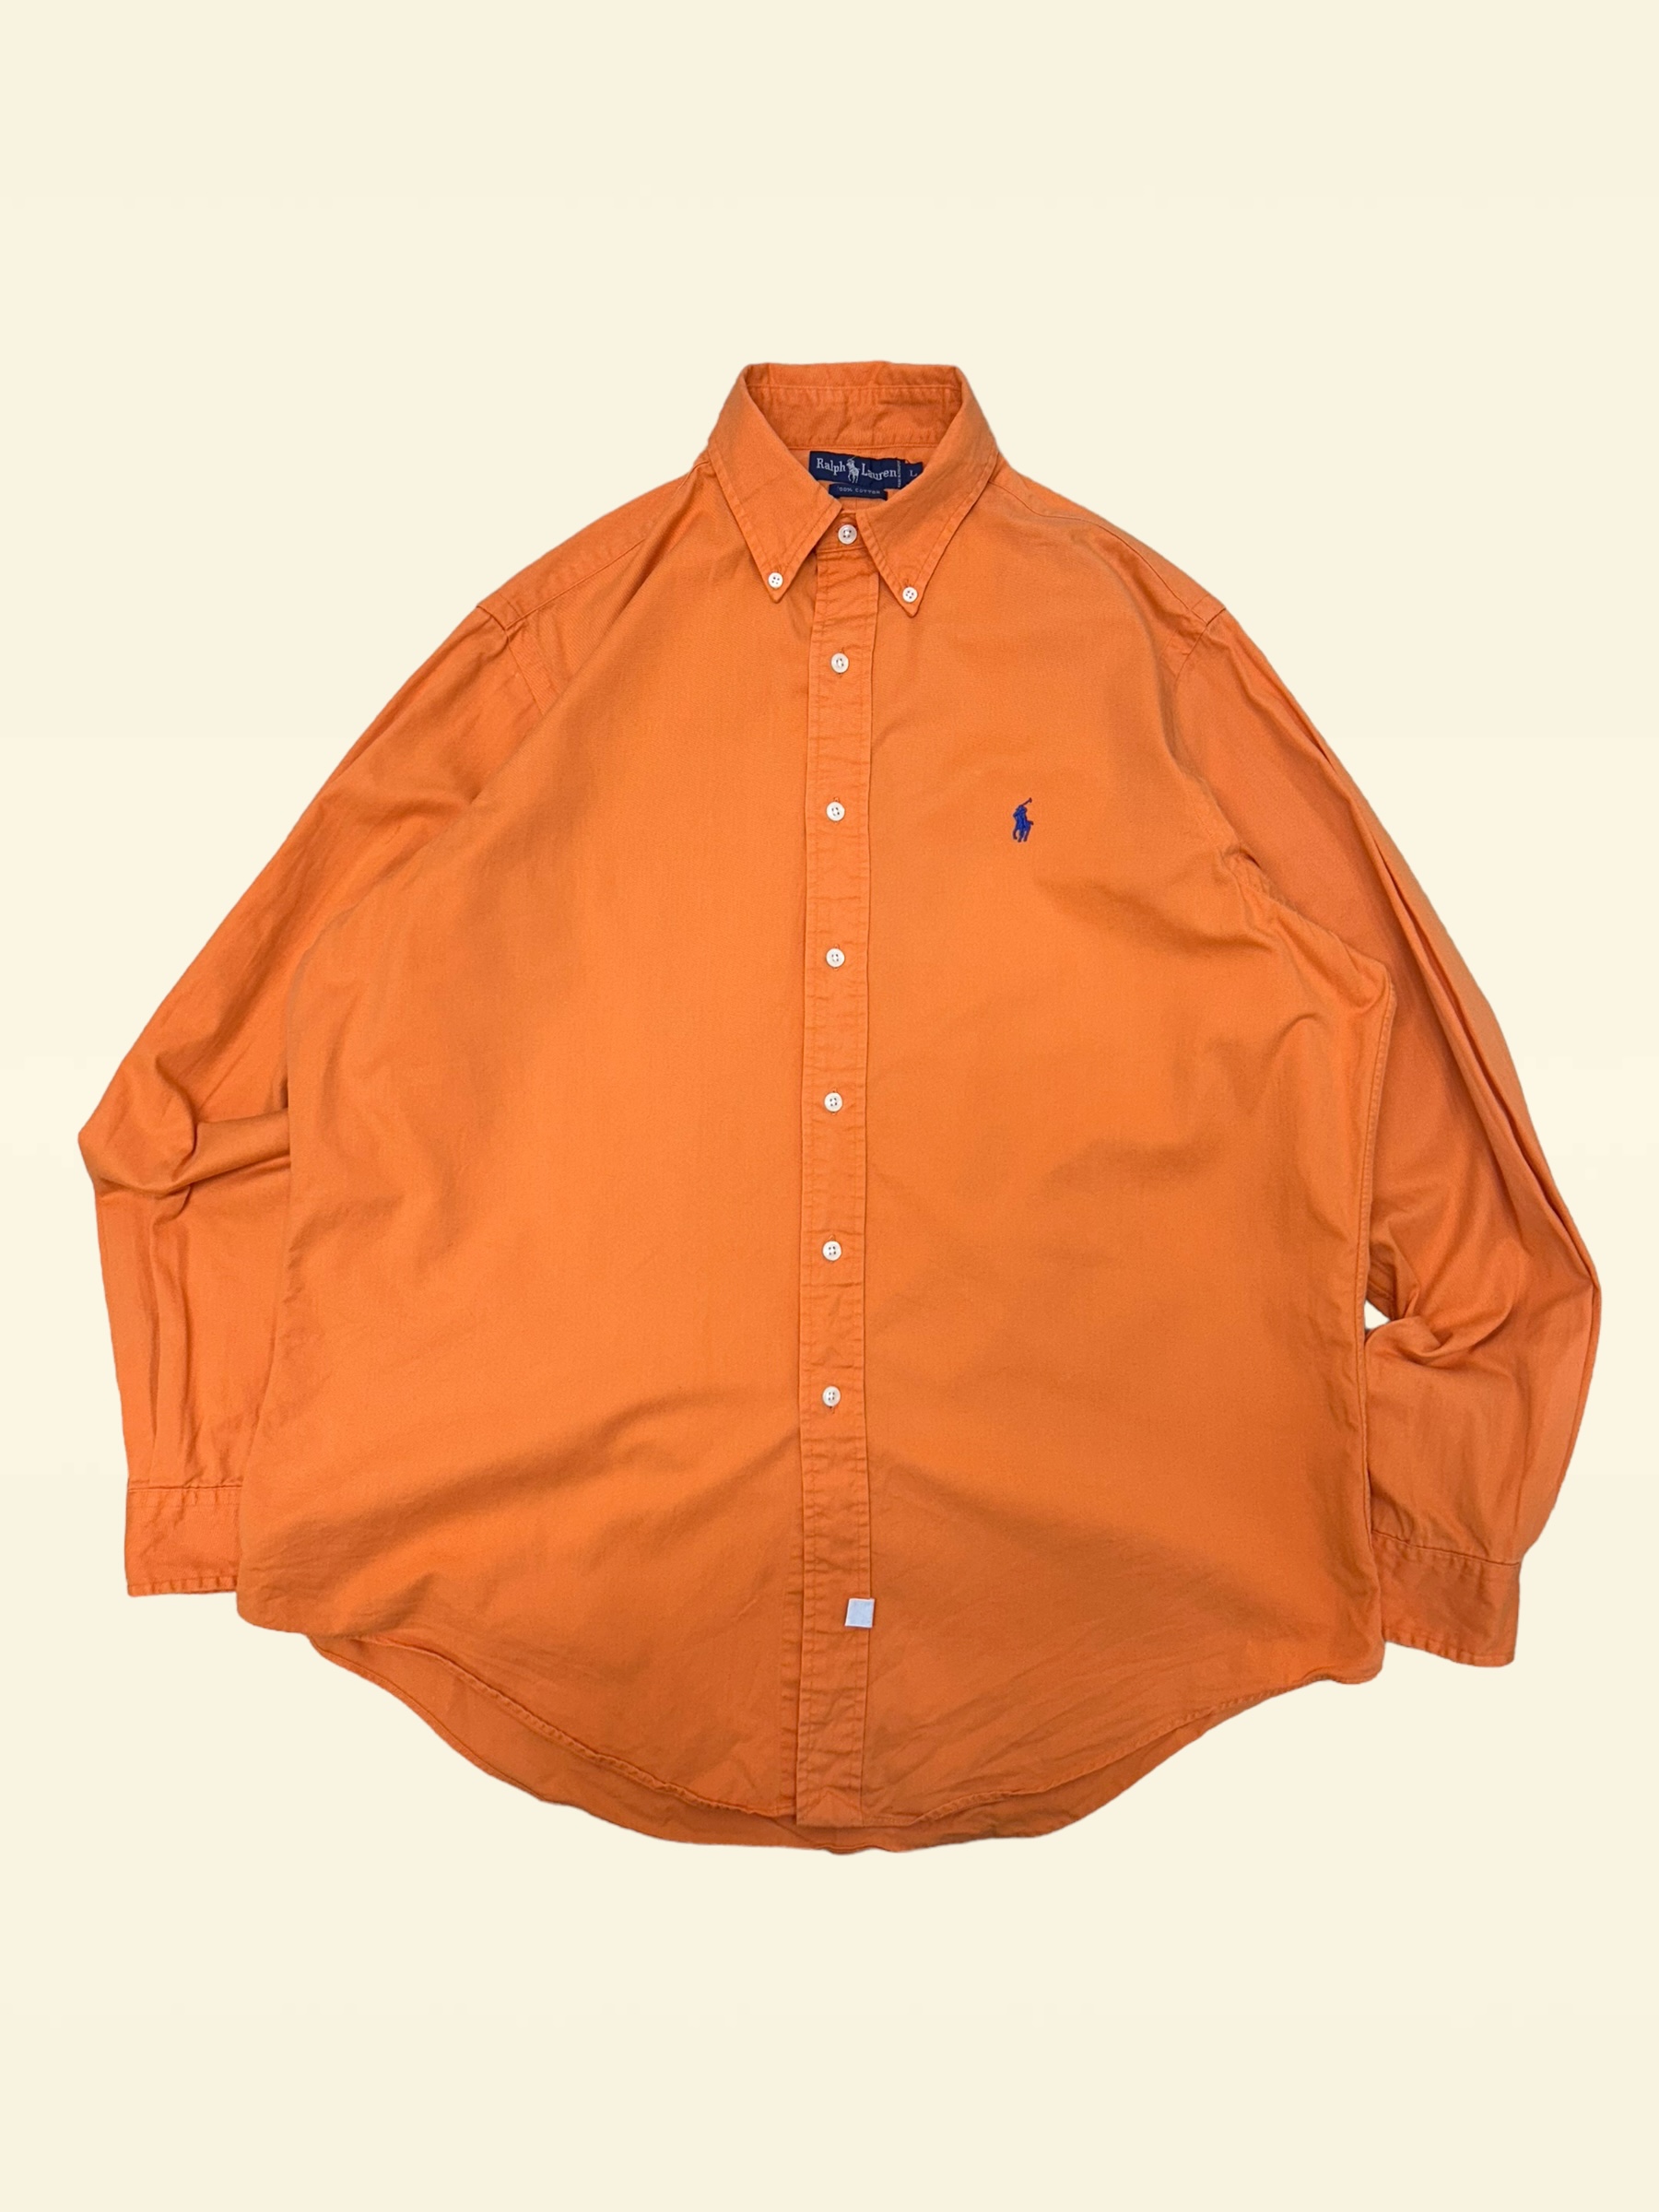 (From USA)Polo ralph lauren orange solid shirt L